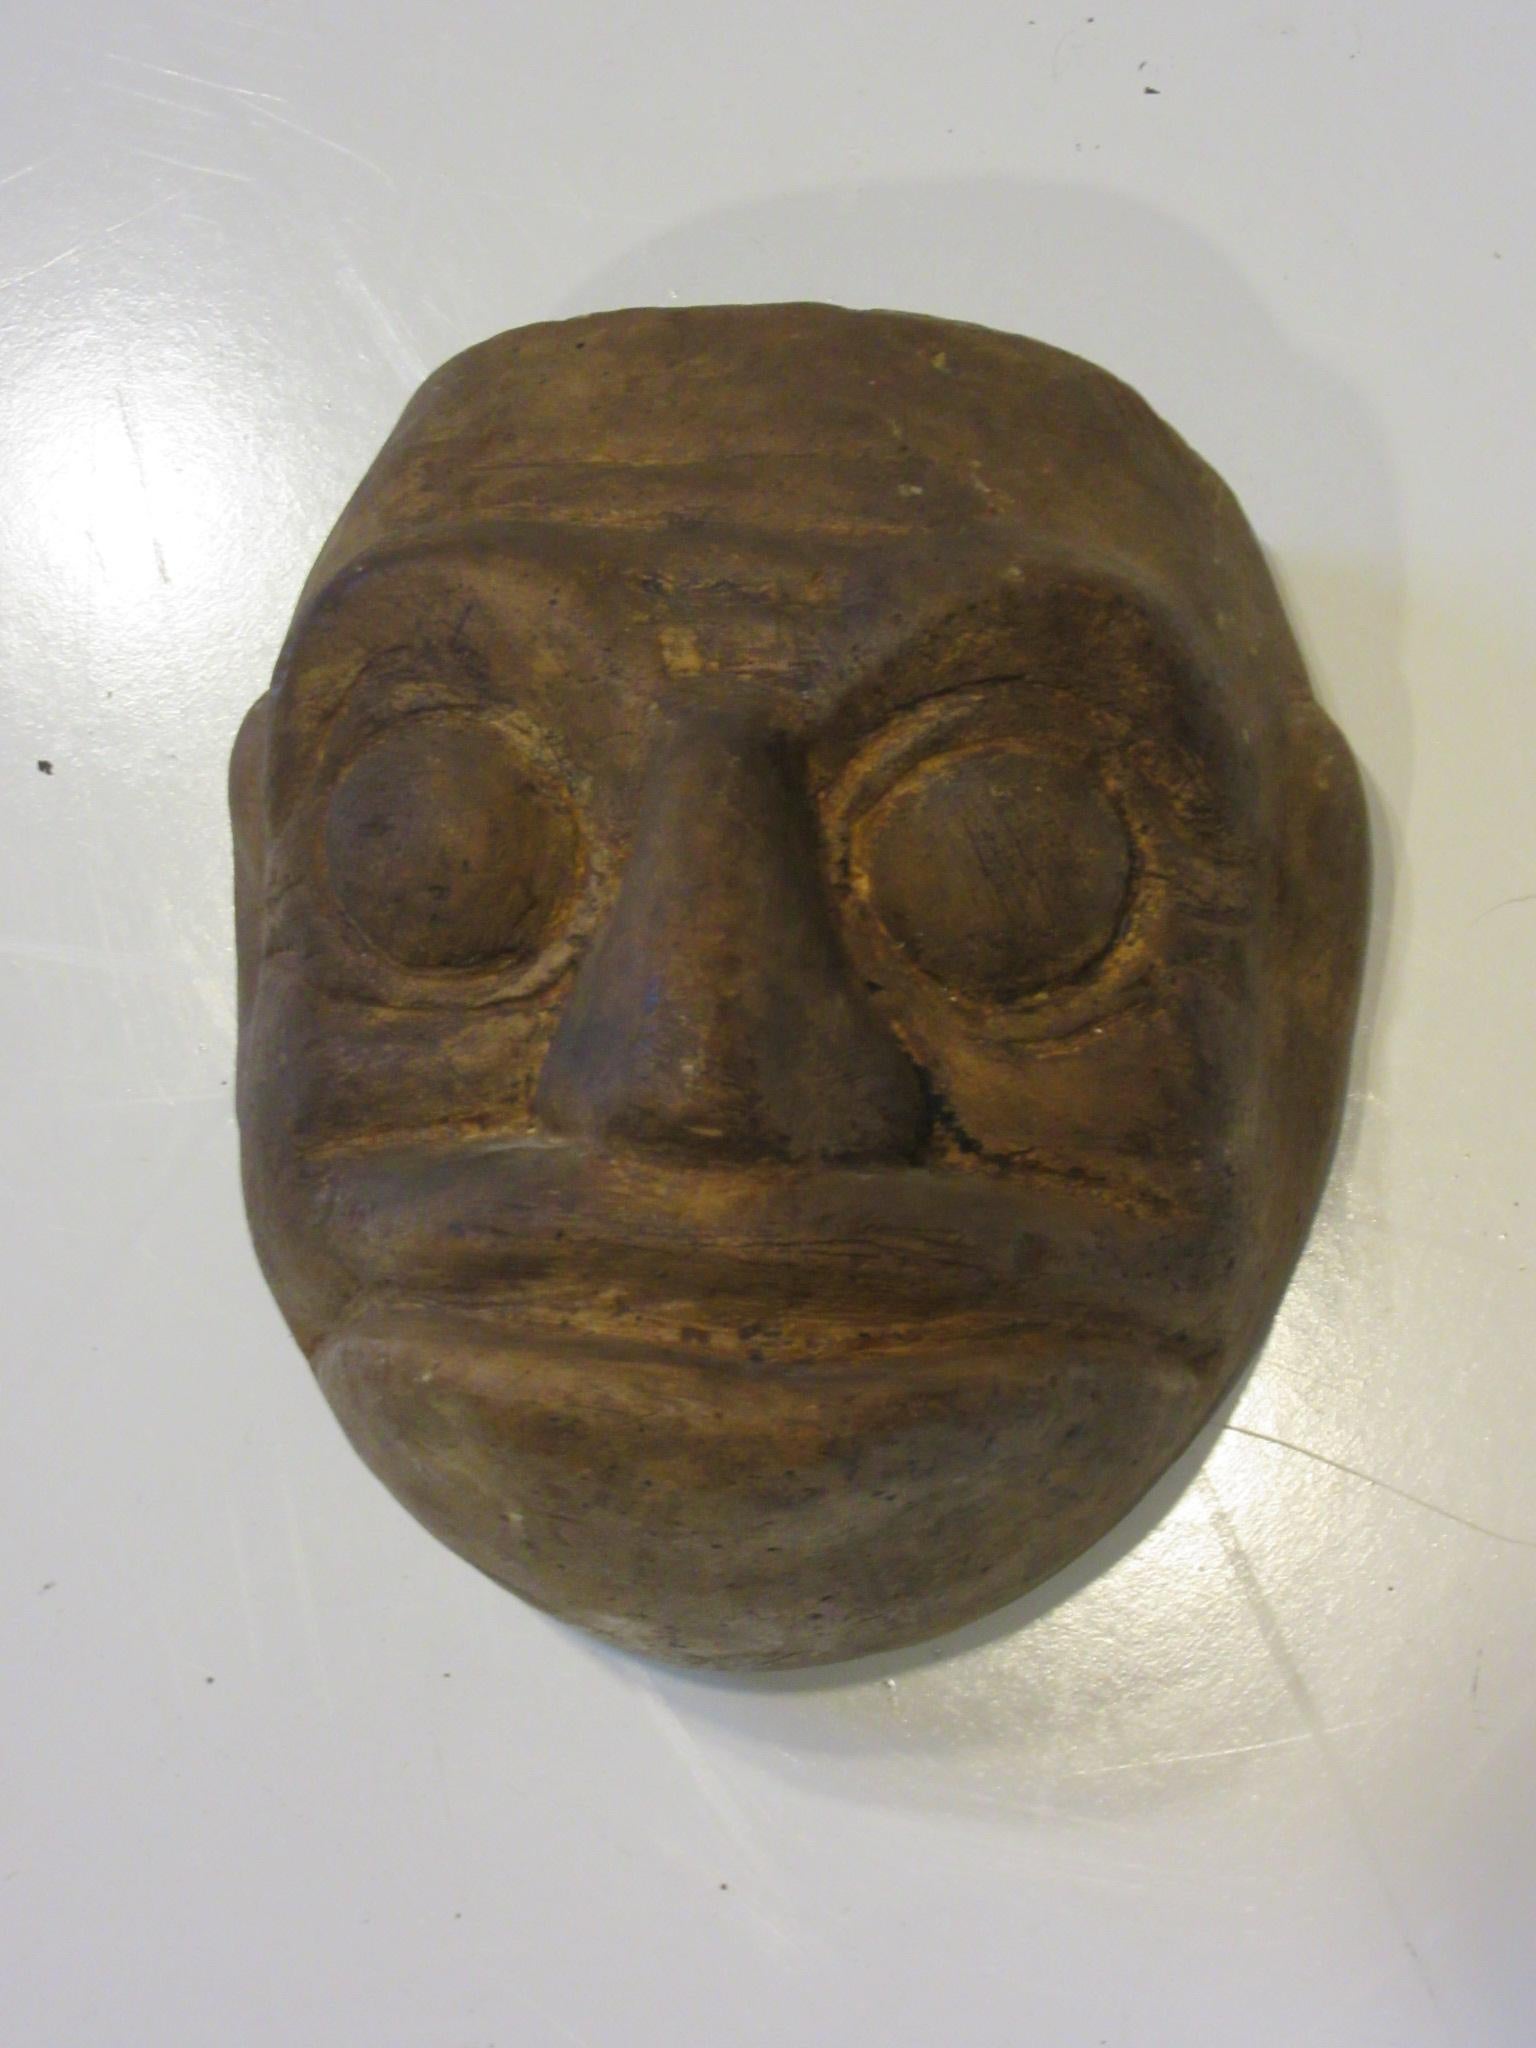 A vintage mask mold from the American Mask Company of a scary animal .